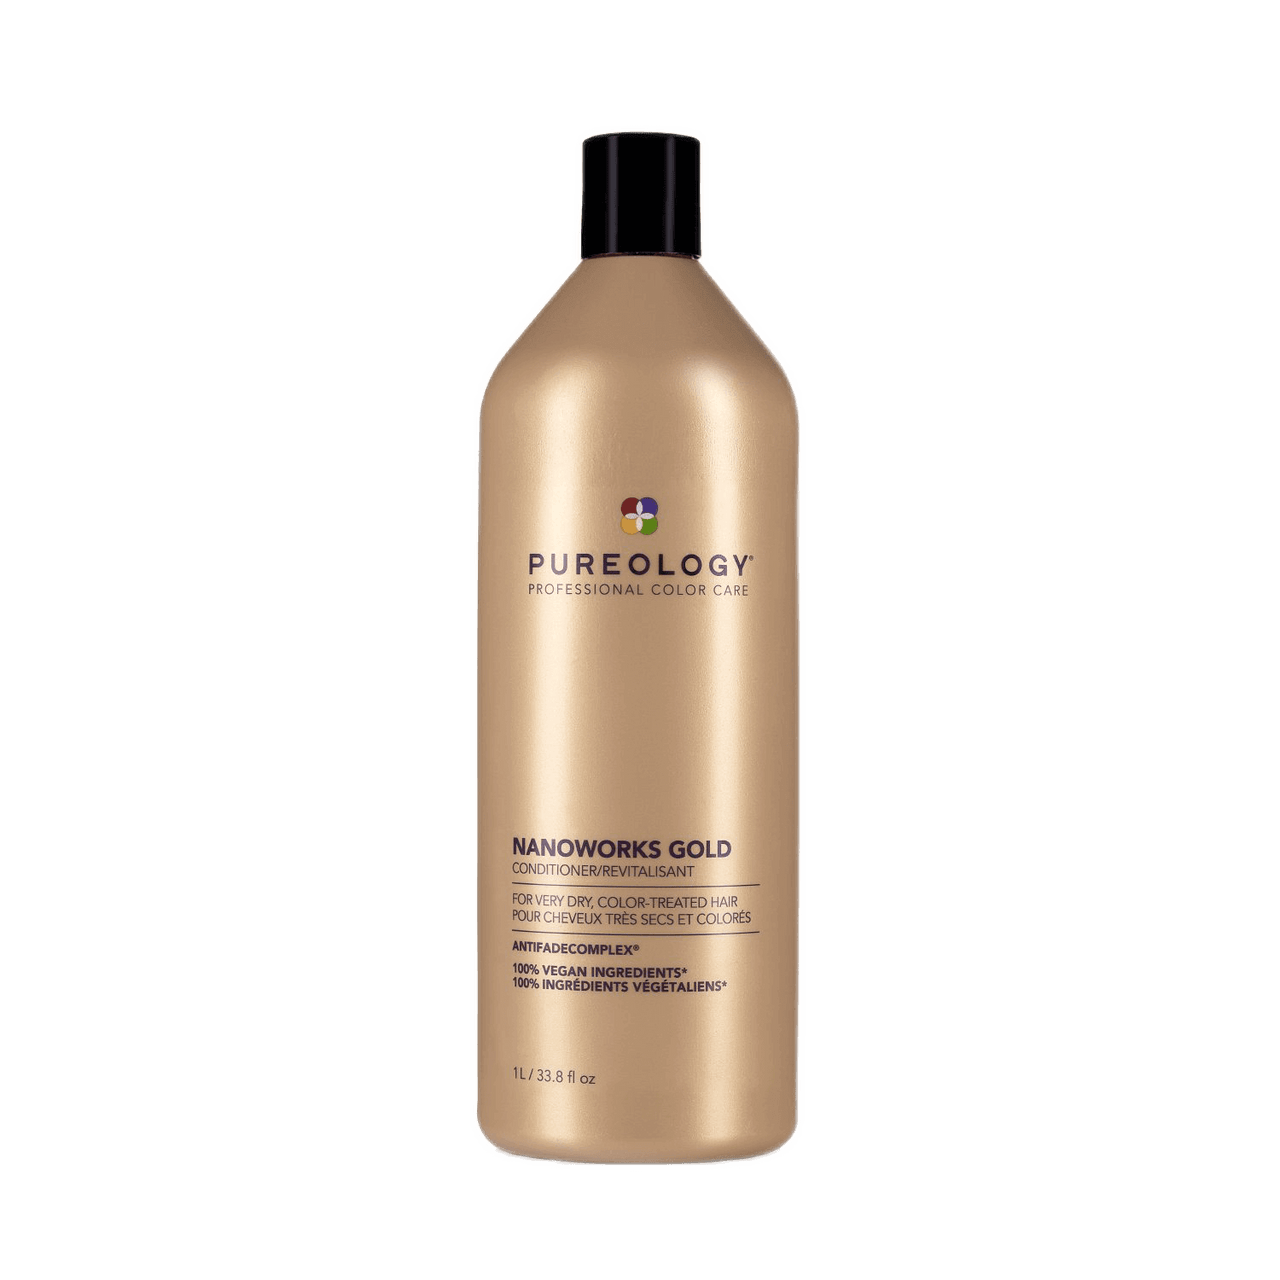 Pureology Nanoworks Gold Conditioner 33.8 oz